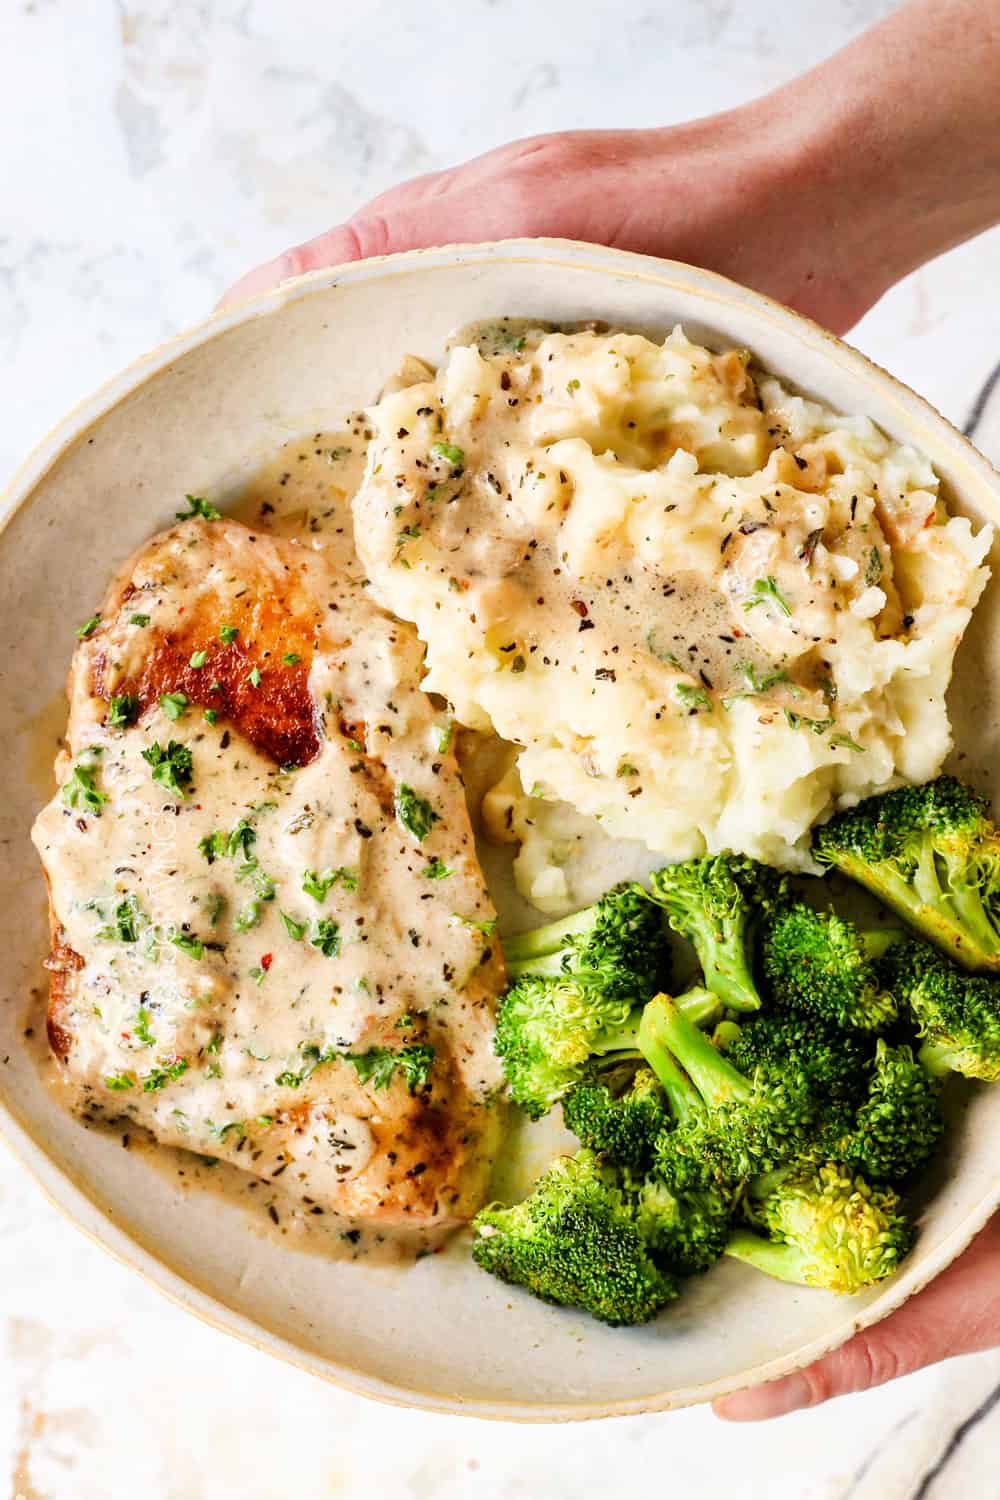 showing how to serve creamy garlic Parmesan chicken by adding to a plate with mashed potatoes and broccoli